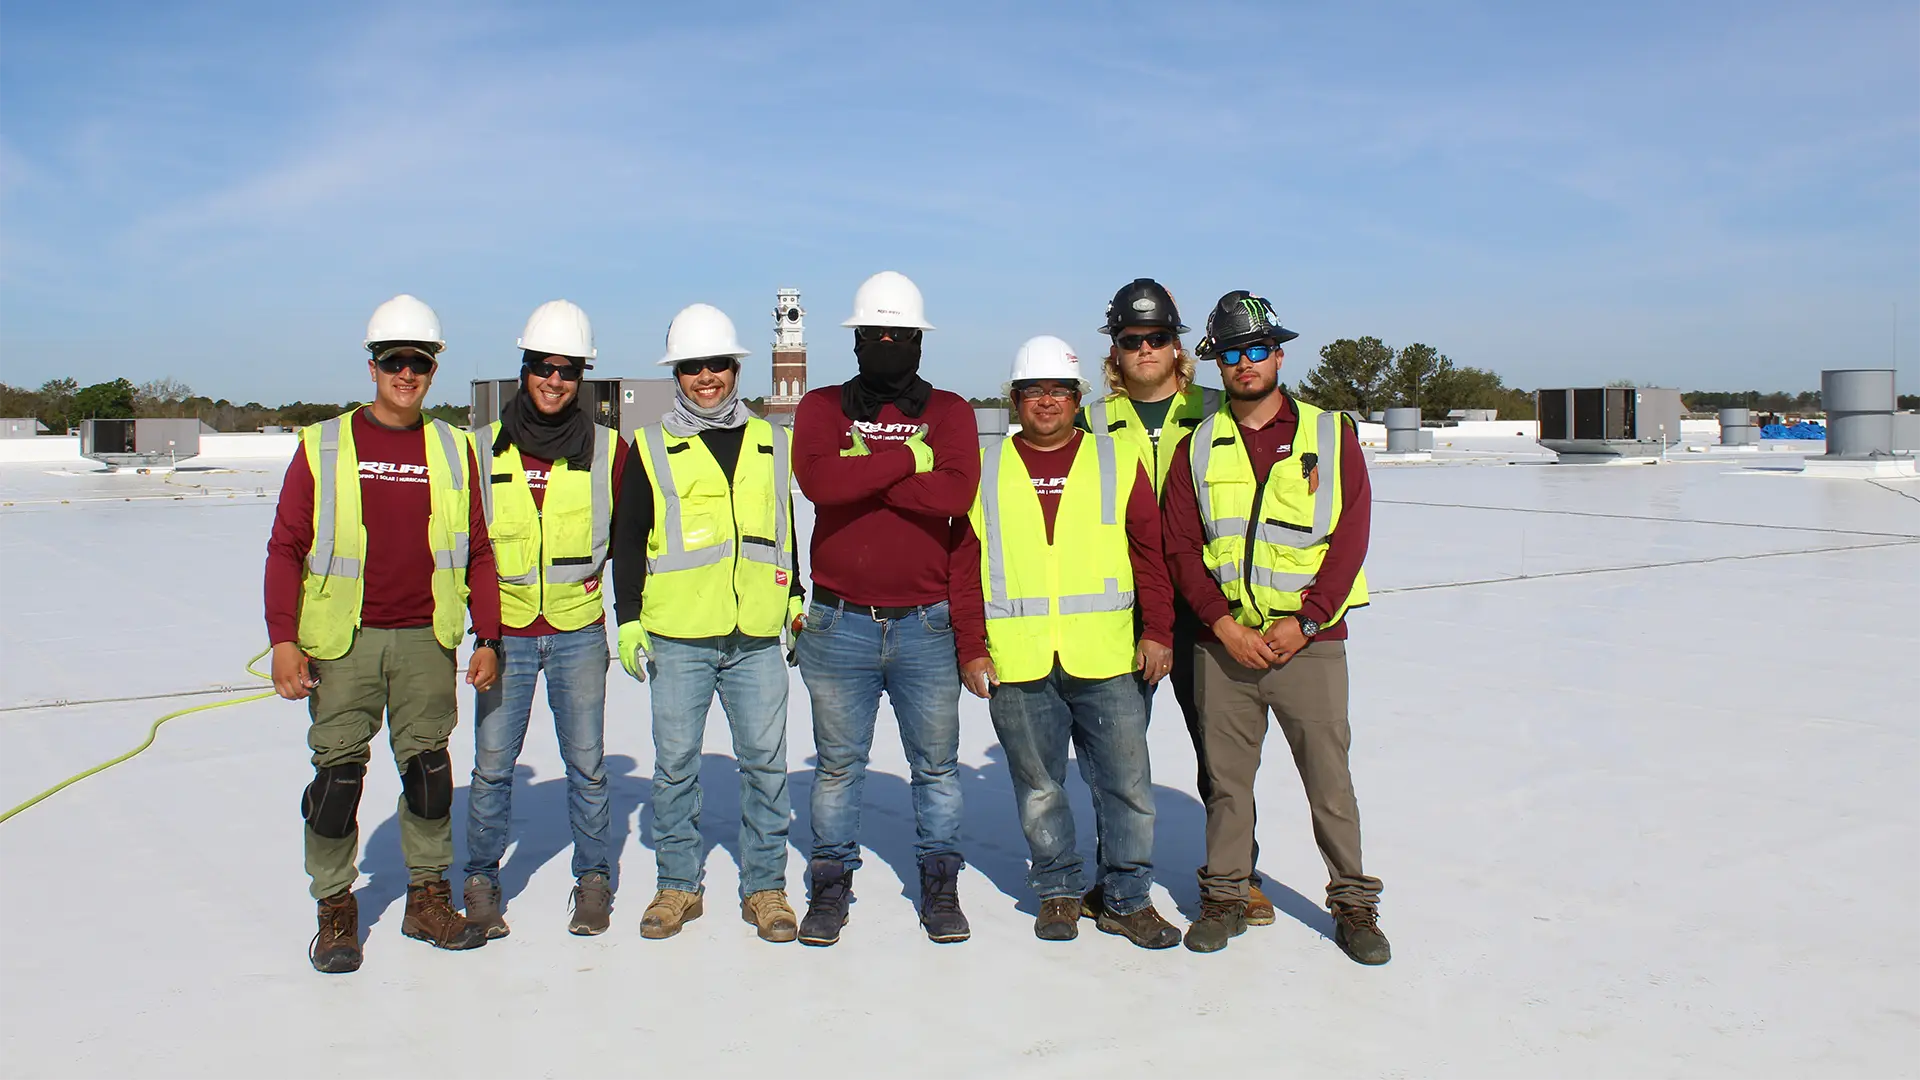 Group photo of construction workers on a rooftop